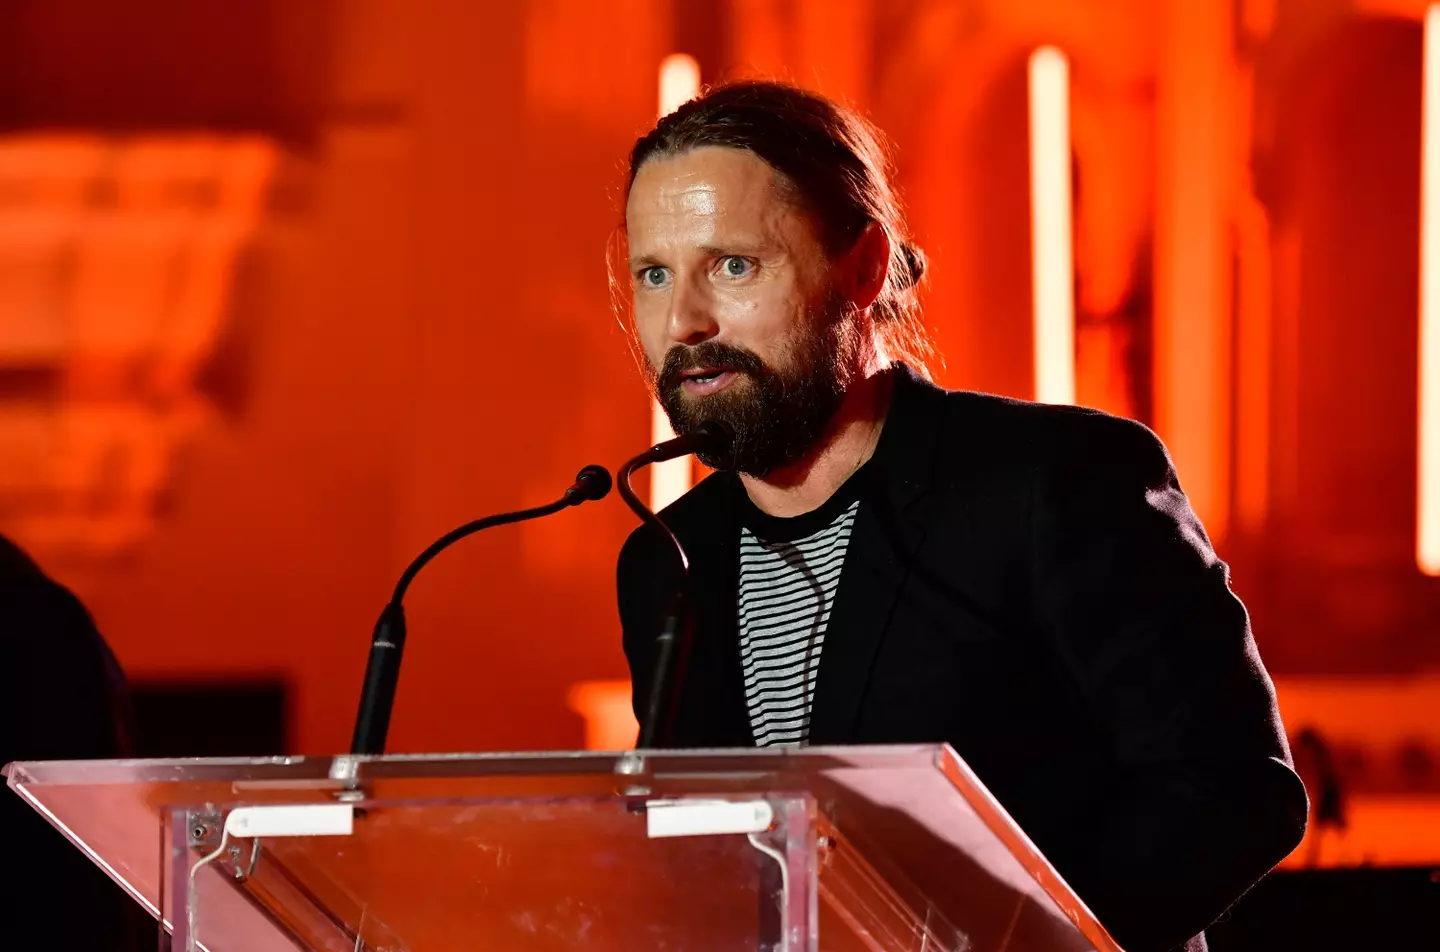 Max Martin has produced a whole host of hits you definitely know.